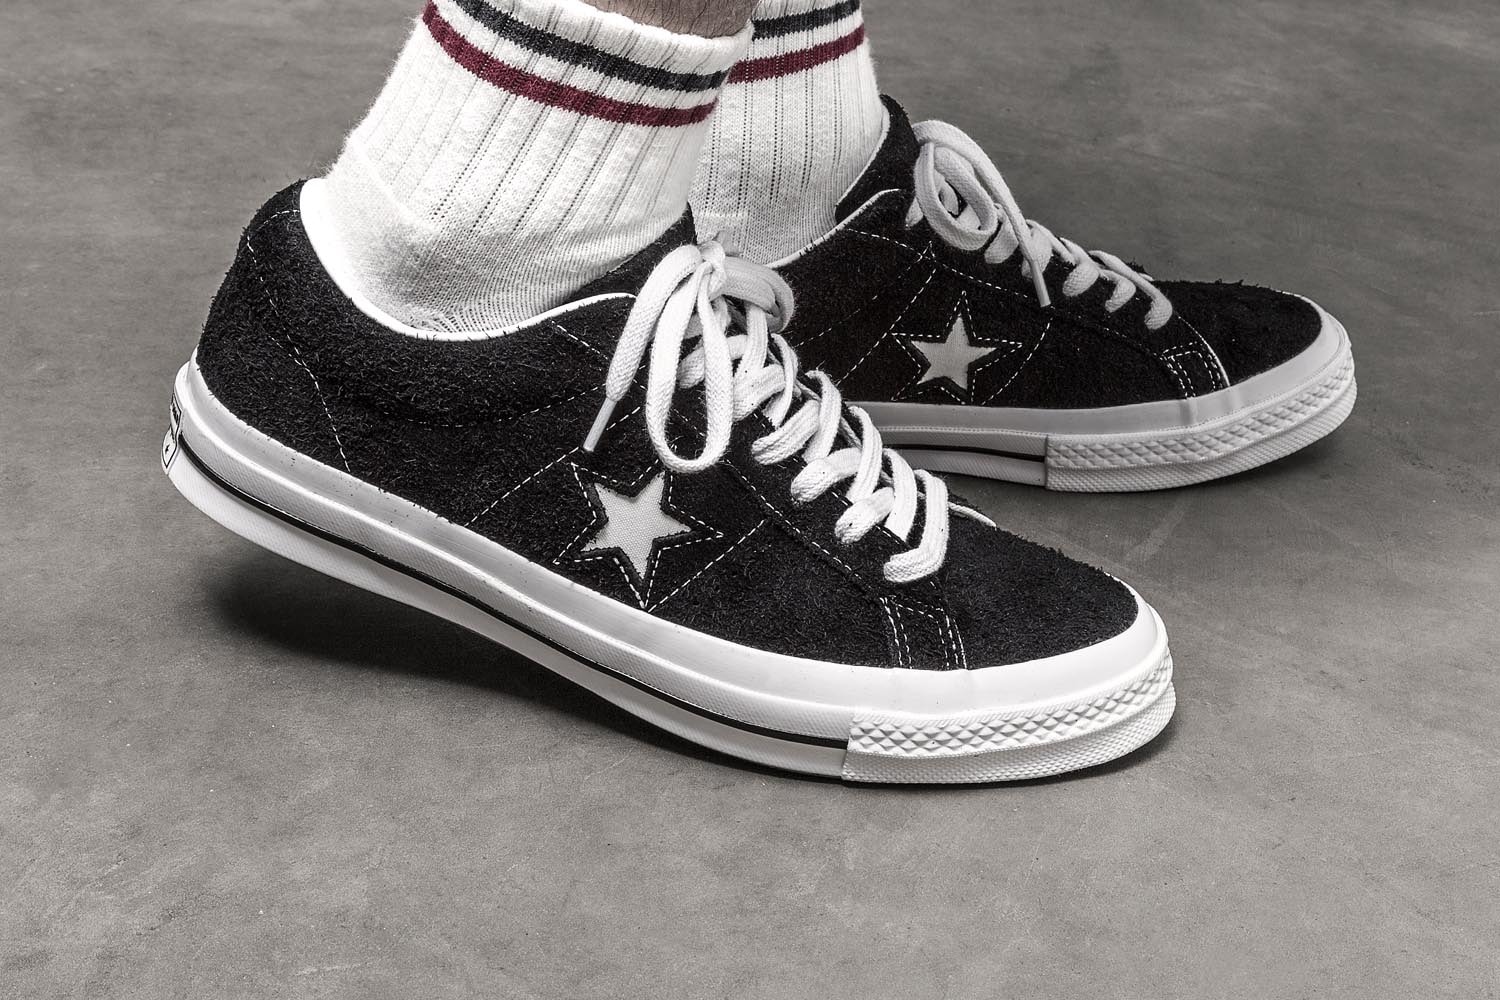 History Behind the Converse One | HBX Journal